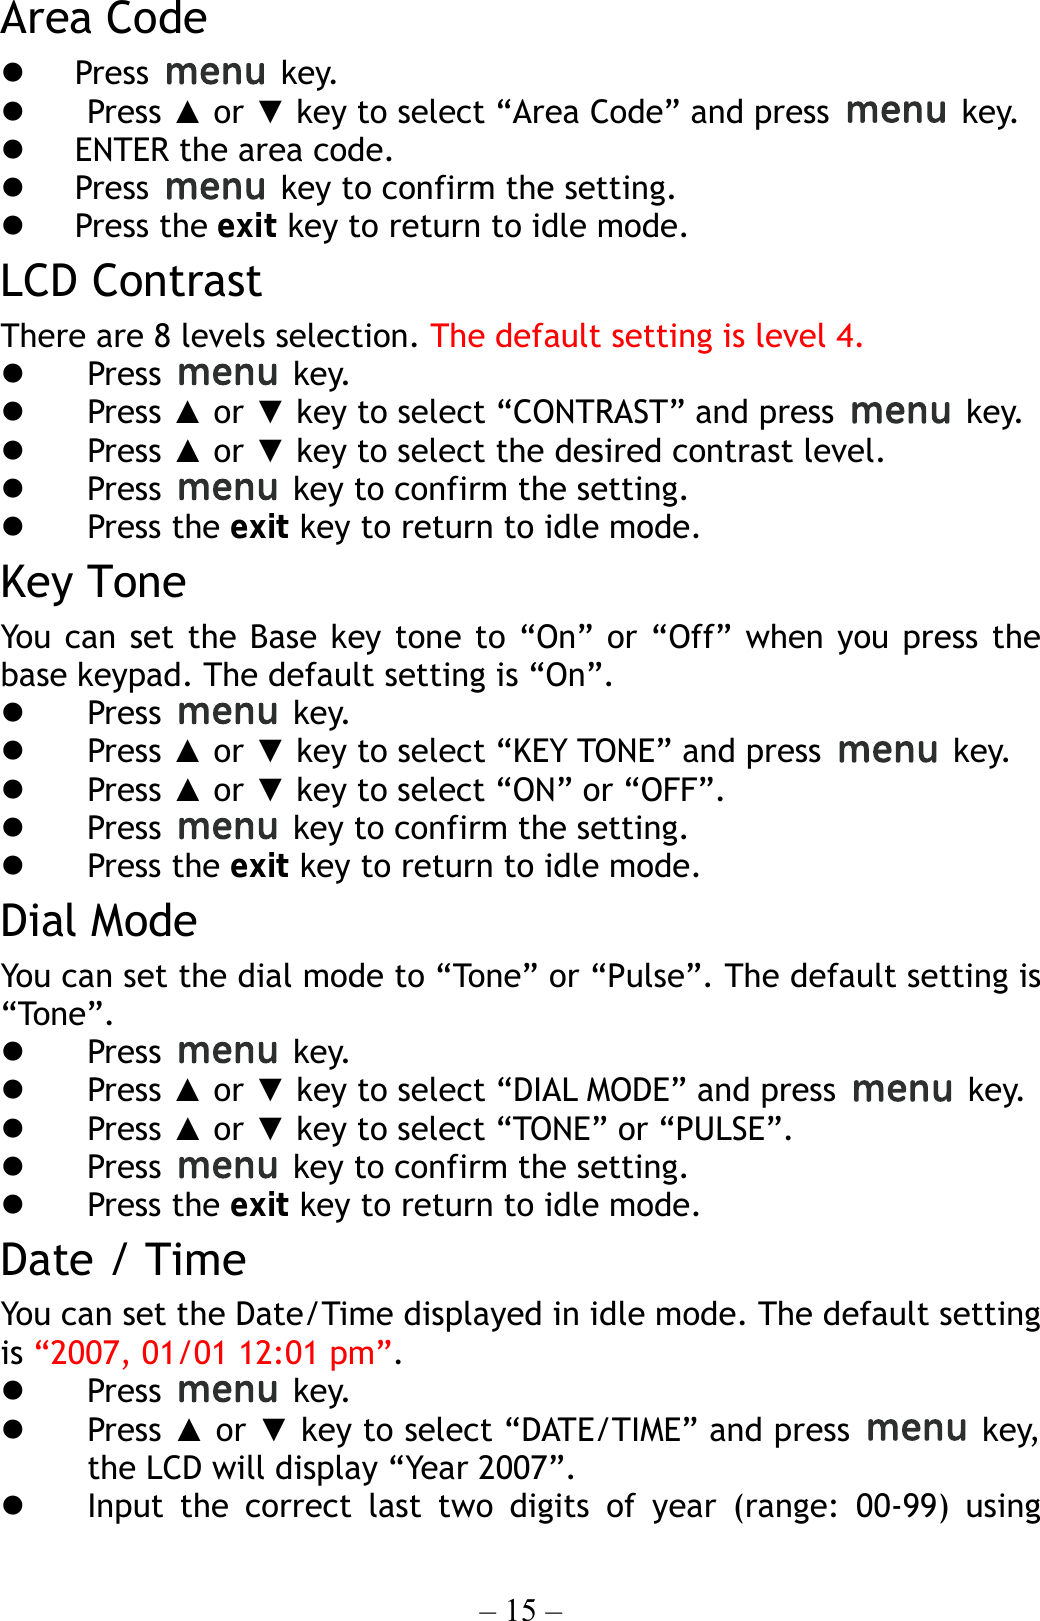 – 15 – Area Code   Press   key.   Press ▲ or ▼ key to select “Area Code” and press   key.   ENTER the area code.   Press    key to confirm the setting.   Press the exit key to return to idle mode. LCD Contrast There are 8 levels selection. The default setting is level 4.   Press   key.   Press ▲ or ▼ key to select “CONTRAST” and press   key.   Press ▲ or ▼ key to select the desired contrast level.   Press    key to confirm the setting.   Press the exit key to return to idle mode. Key Tone You can set the Base key tone to “On” or “Off” when you press the base keypad. The default setting is “On”.   Press   key.   Press ▲ or ▼ key to select “KEY TONE” and press   key.   Press ▲ or ▼ key to select “ON” or “OFF”.   Press    key to confirm the setting.   Press the exit key to return to idle mode. Dial Mode You can set the dial mode to “Tone” or “Pulse”. The default setting is “Tone”.   Press   key.   Press ▲ or ▼ key to select “DIAL MODE” and press   key.   Press ▲ or ▼ key to select “TONE” or “PULSE”.   Press    key to confirm the setting.   Press the exit key to return to idle mode. Date / Time You can set the Date/Time displayed in idle mode. The default setting is “2007, 01/01 12:01 pm”.   Press   key.   Press ▲ or ▼ key to select “DATE/TIME” and press   key, the LCD will display “Year 2007”.   Input the correct last two digits of year (range: 00-99) using 